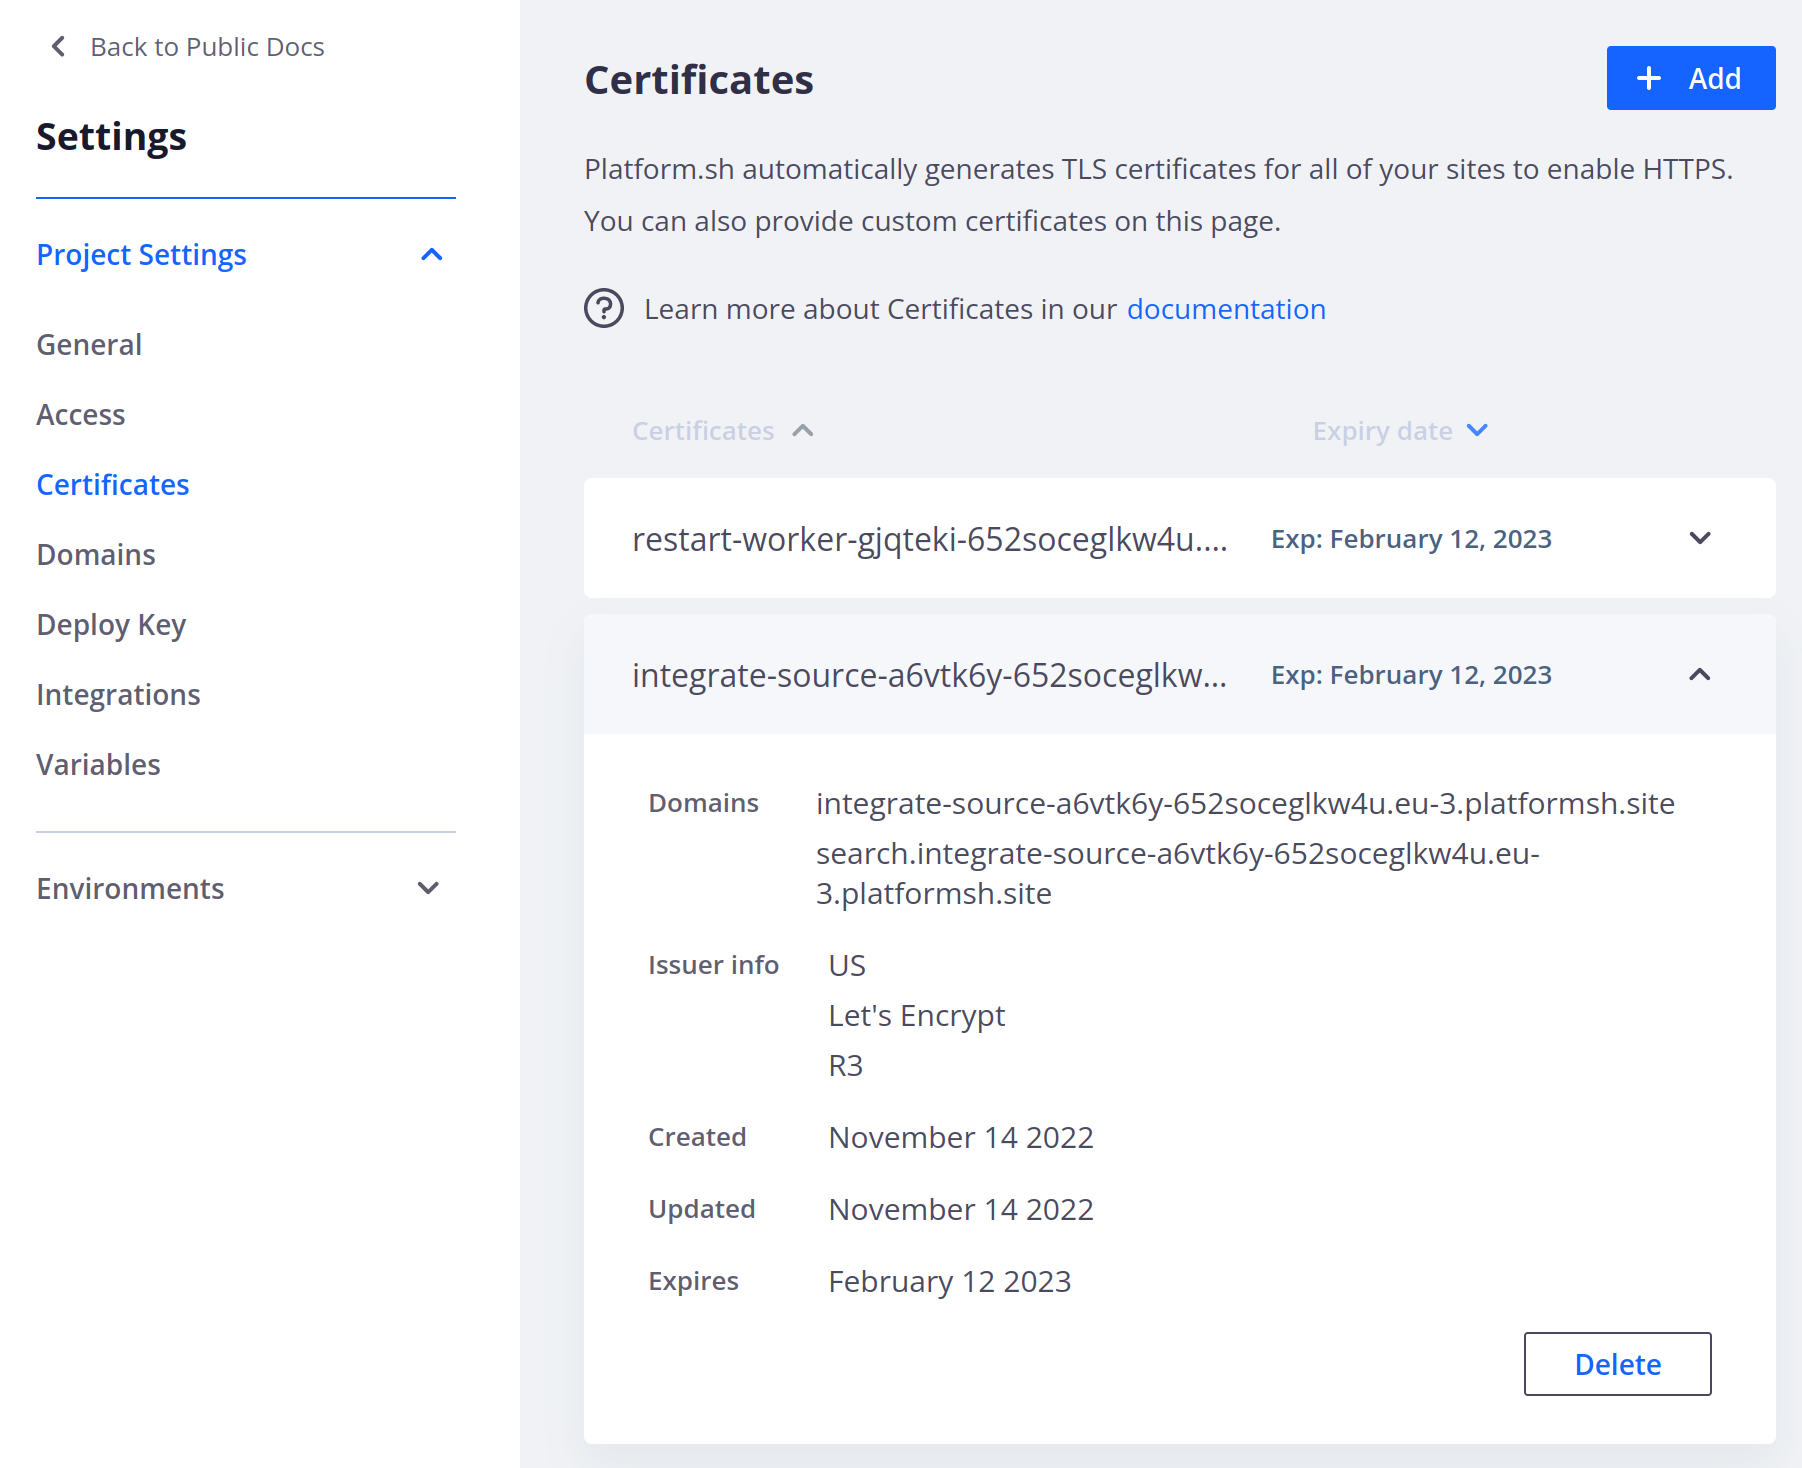 A list of certificates in a project